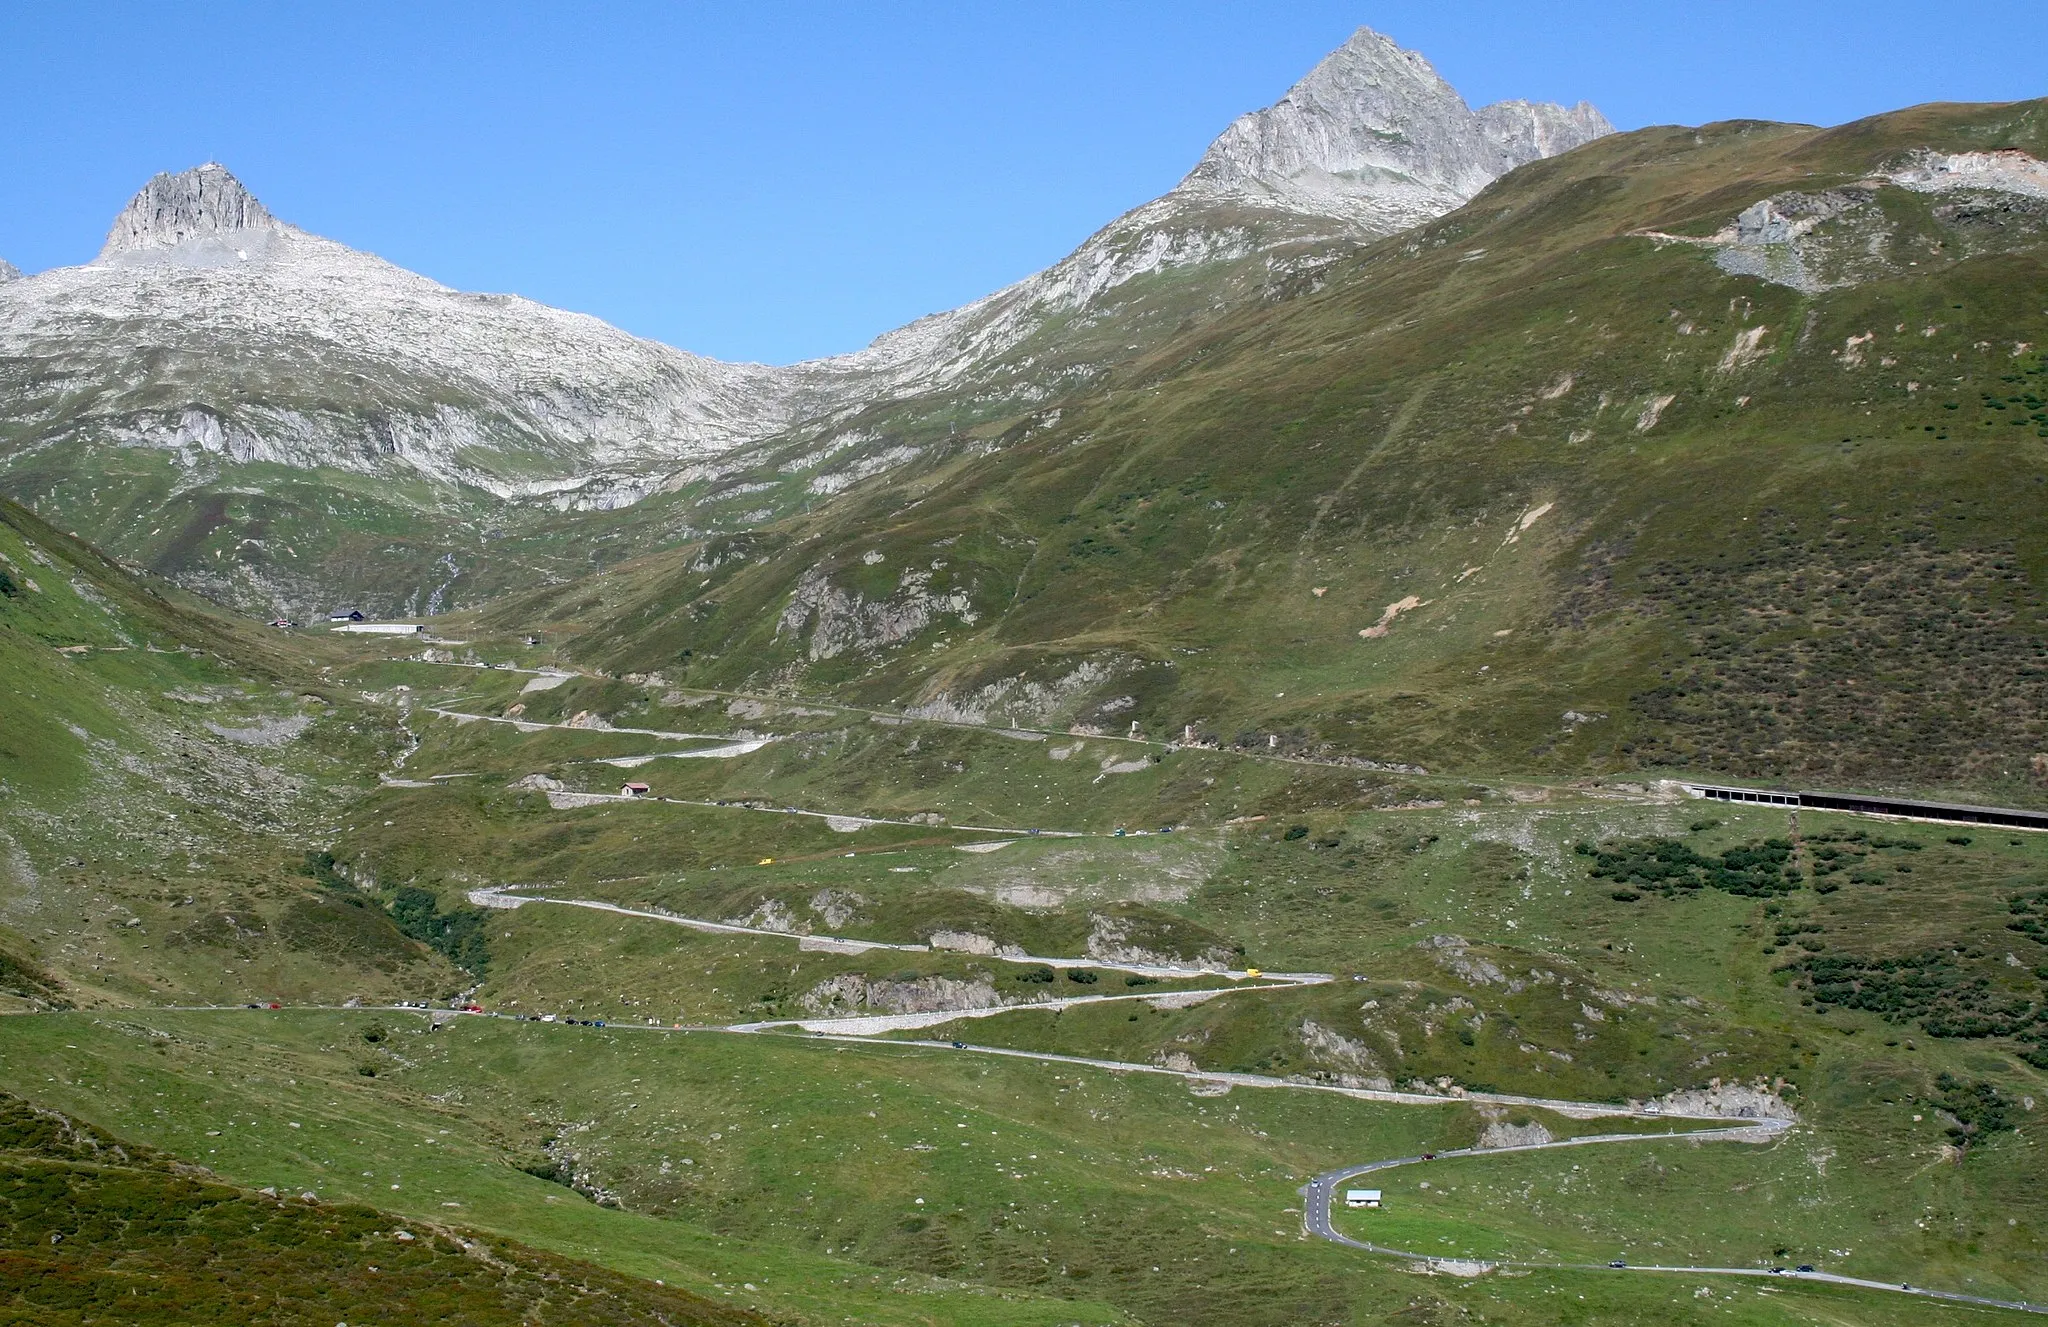 Photo showing: Oberalppass, eastern rise showing road serpentines and railway line above the road